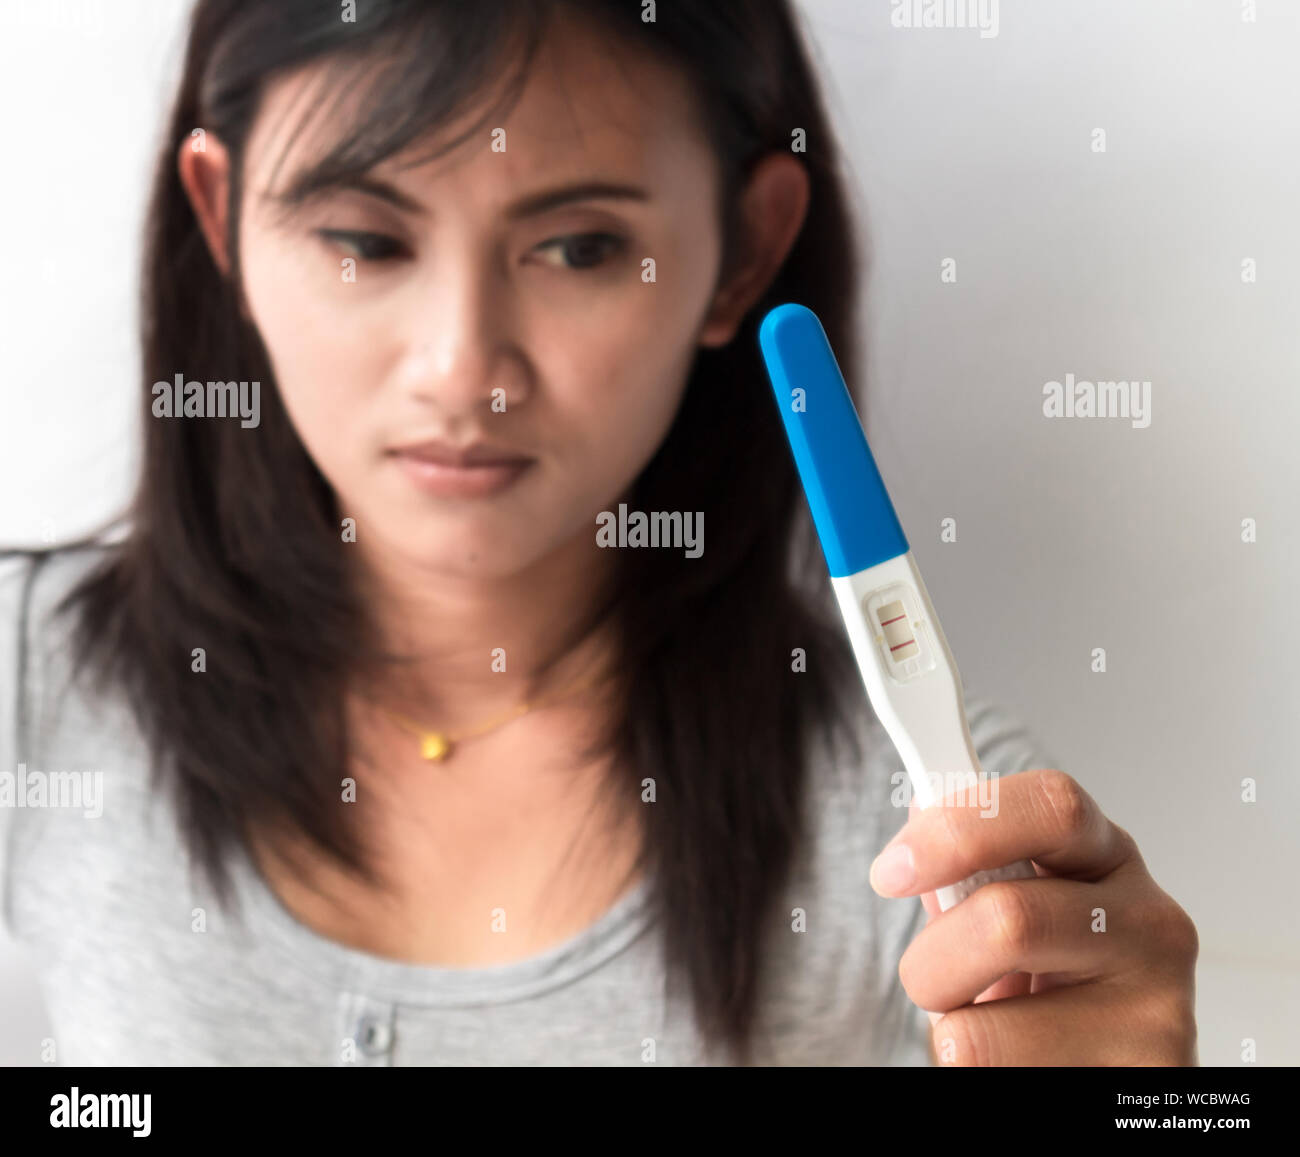 Upset Woman Holding Positive Pregnancy Test Result Against Wall Stock Photo